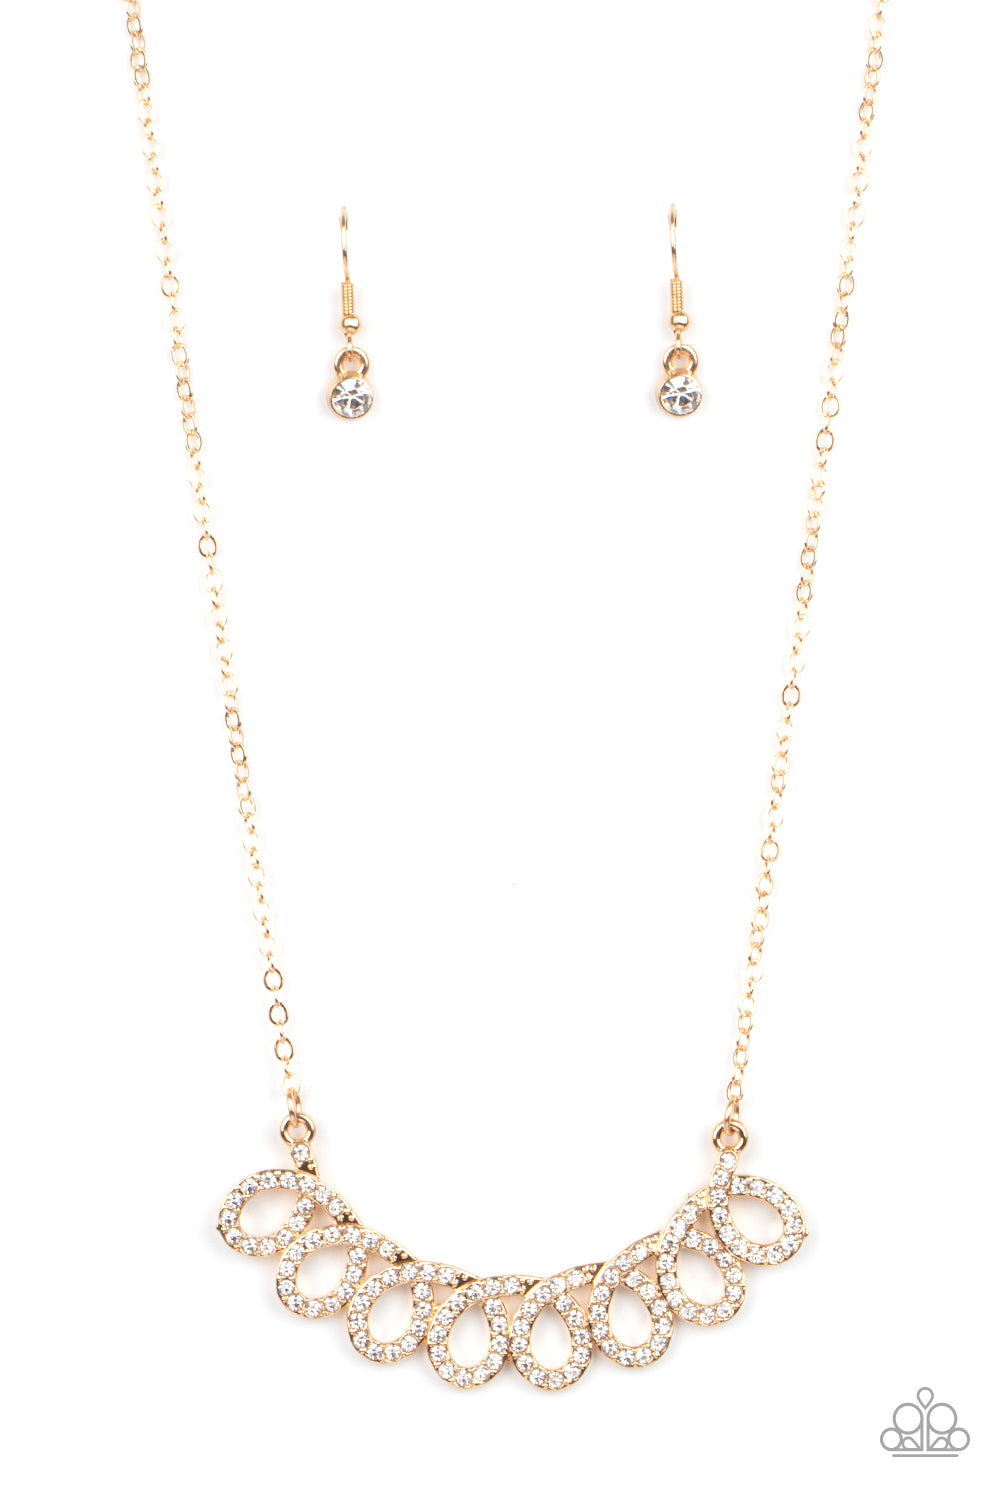 Paparazzi Accessories Timeless Trimmings - Gold Necklaces - Lady T Accessories